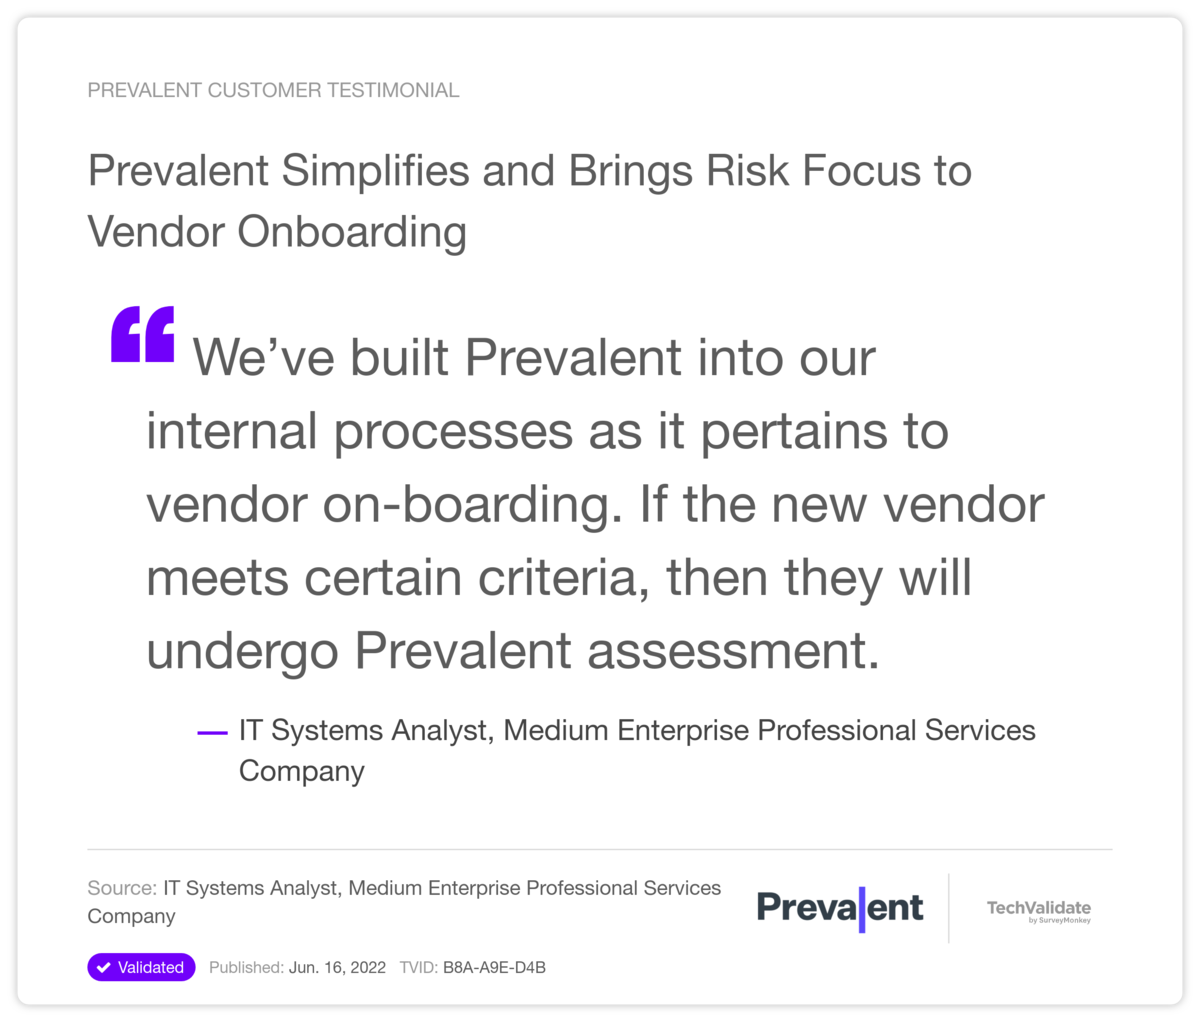 Prevalent Simplifies and Brings Risk Focus to Vendor Onboarding